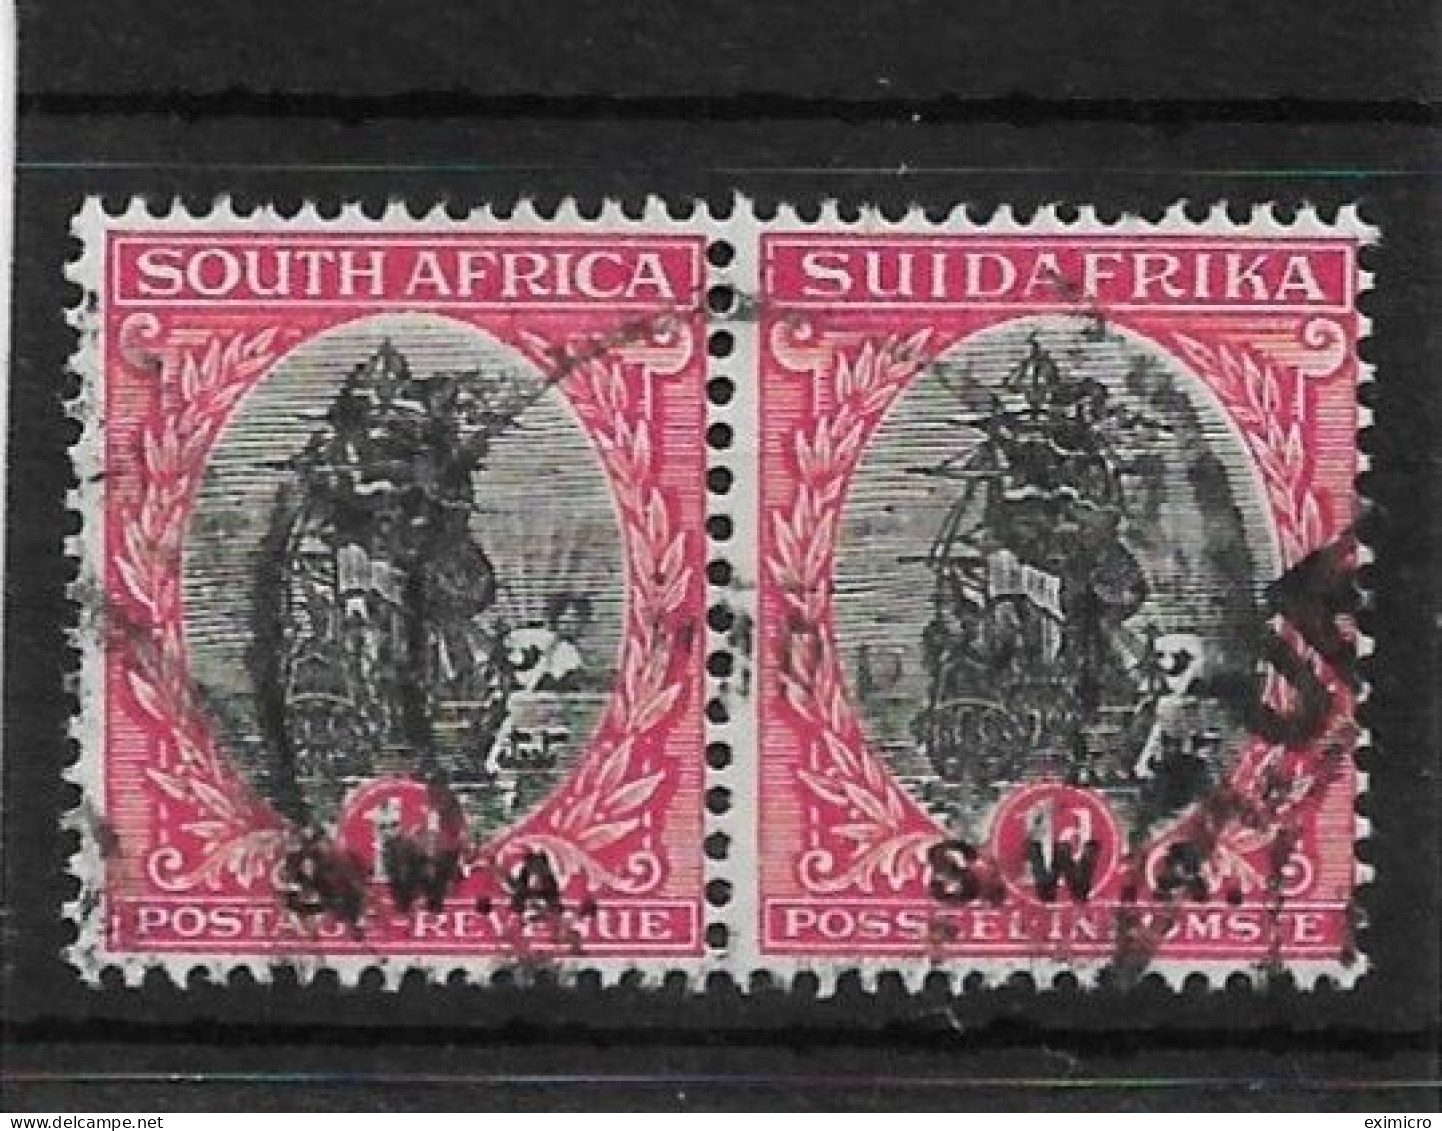 SOUTH AFRICA 1927 1d SG 59 FINE USED Cat £4.25 - Used Stamps